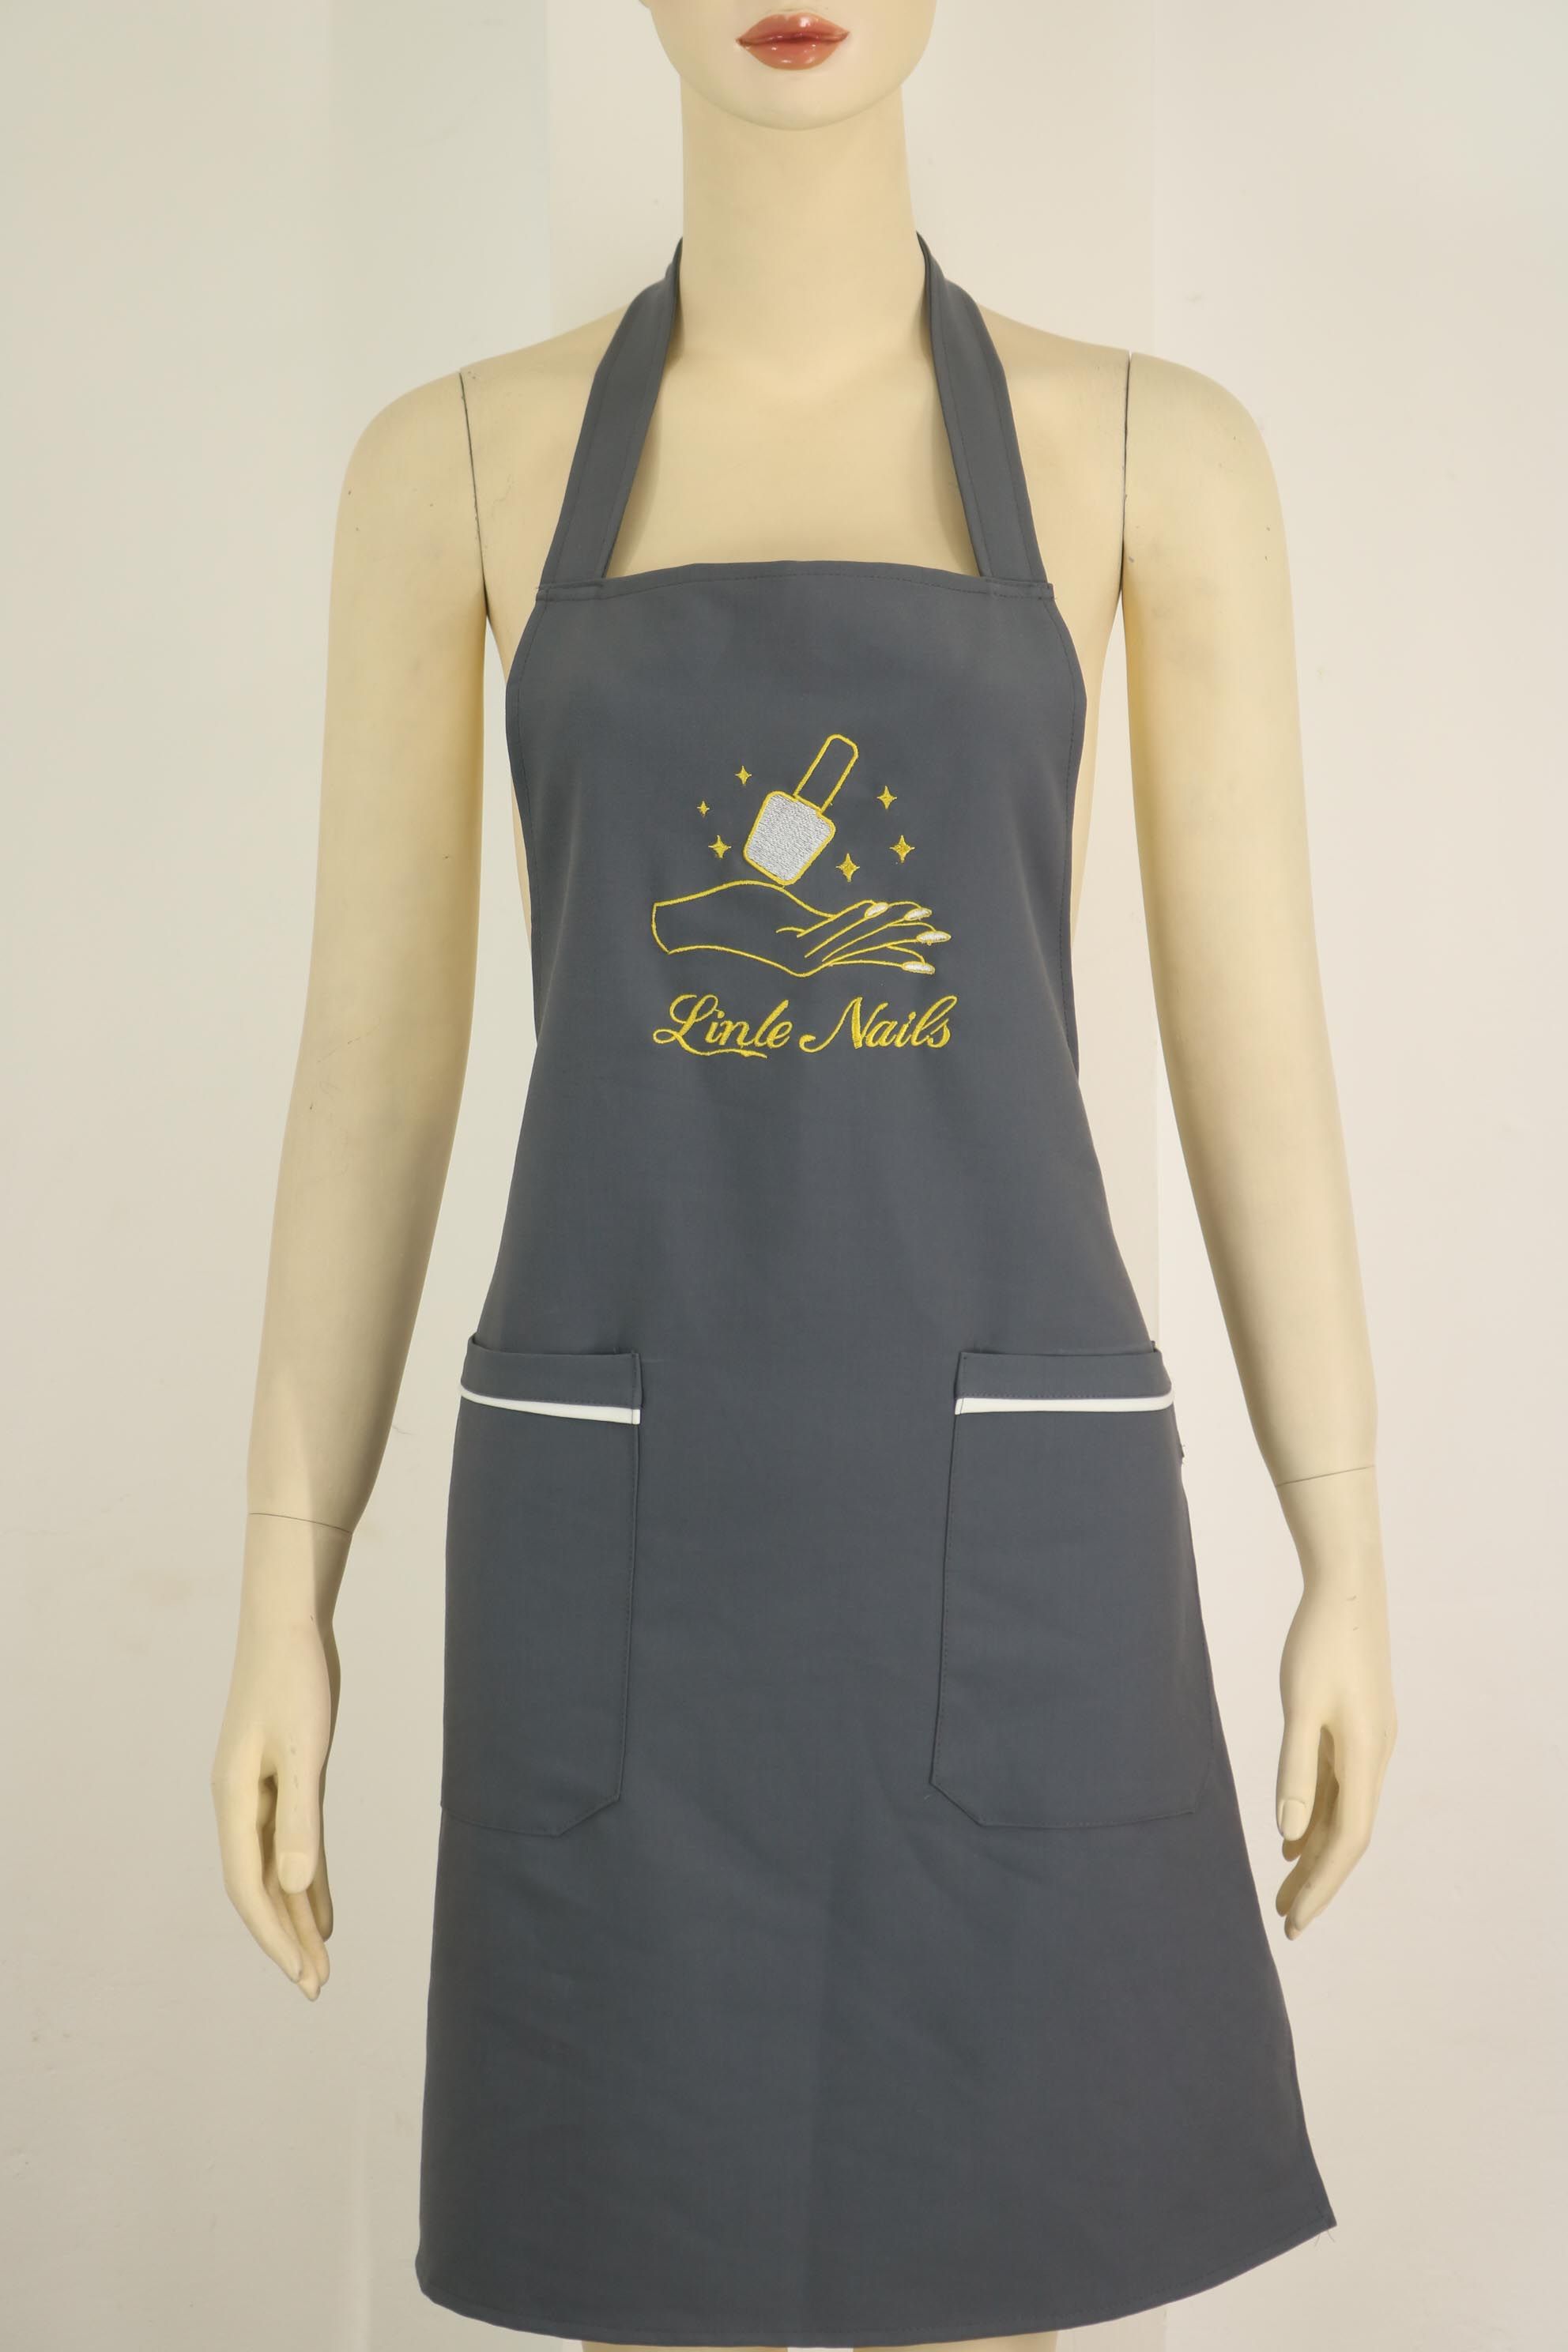 4 Benefits Mainly Of The Print Apron